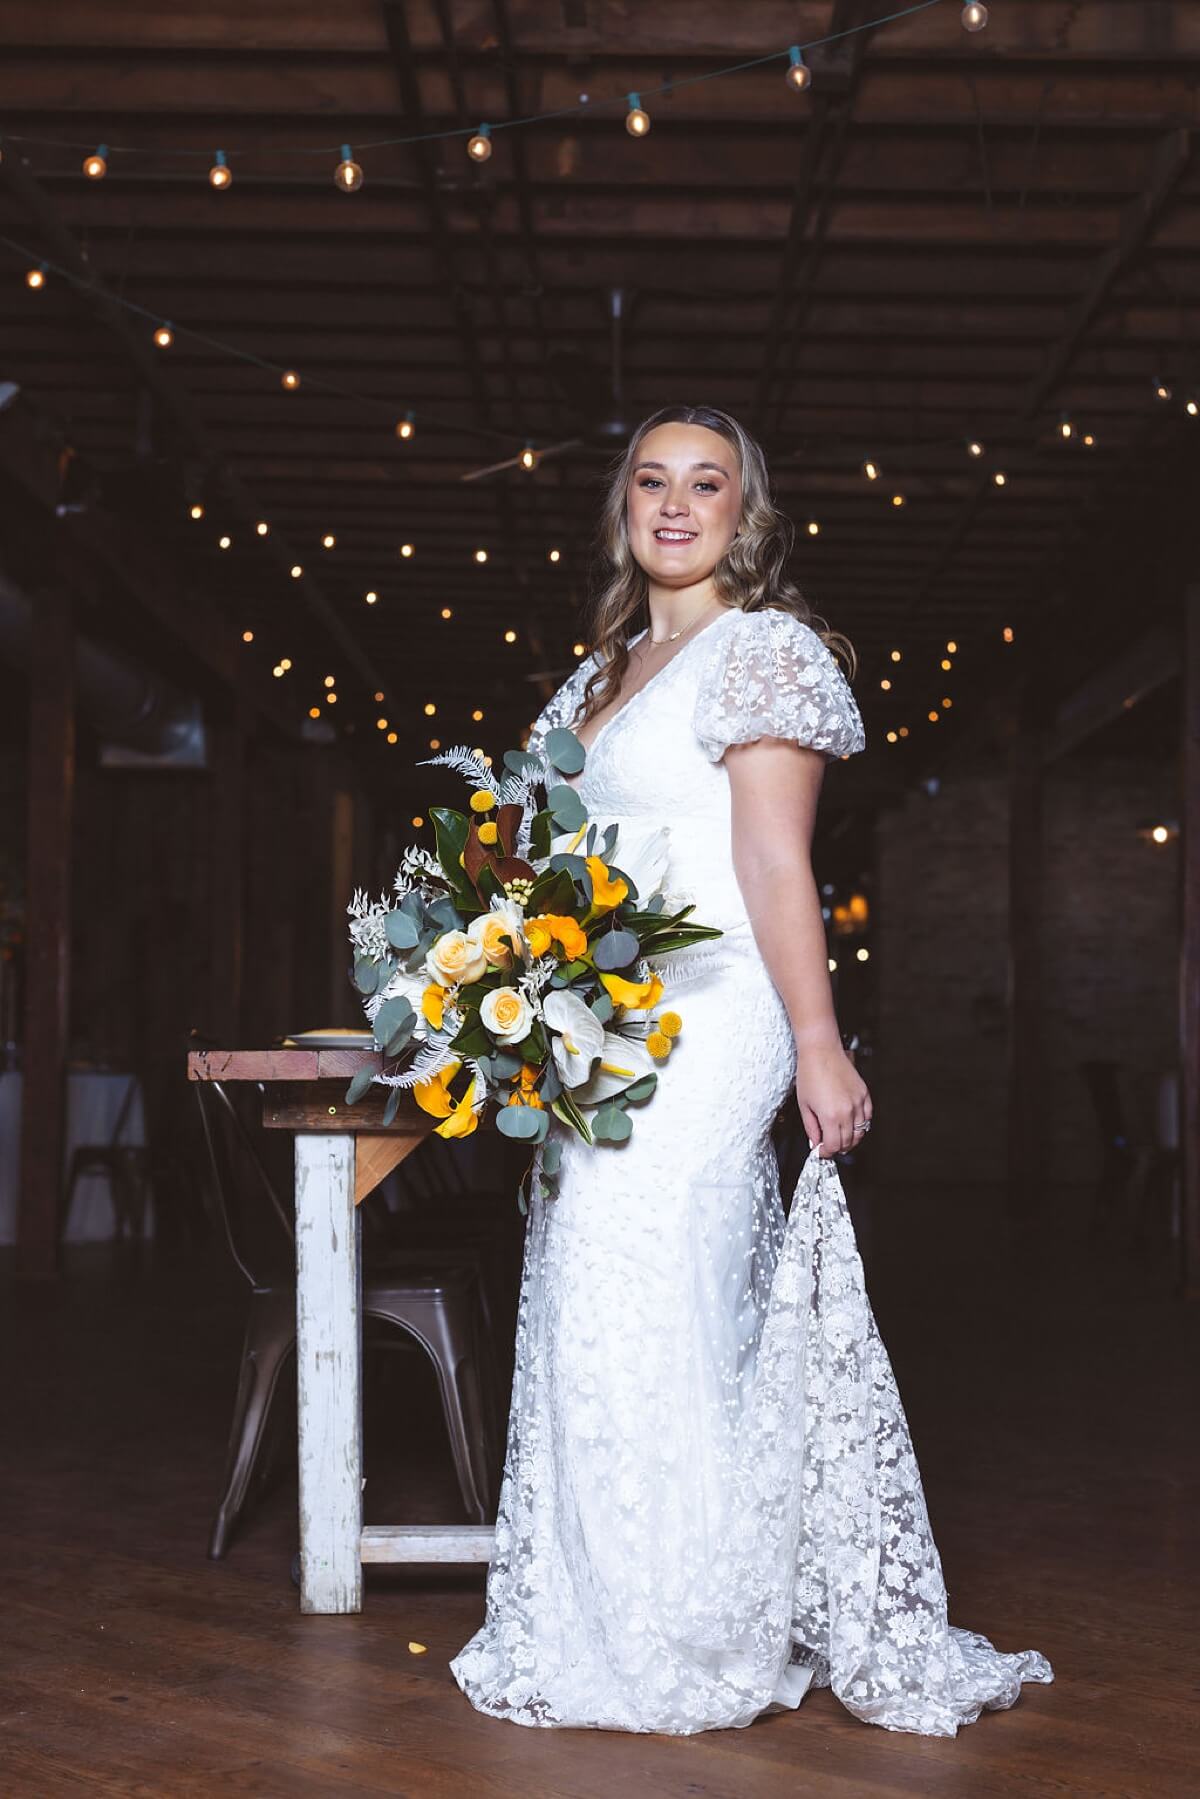 Bride wearing puffed sleeve wedding gown holding yellow and white bouquet at loft wedding venue Chicago